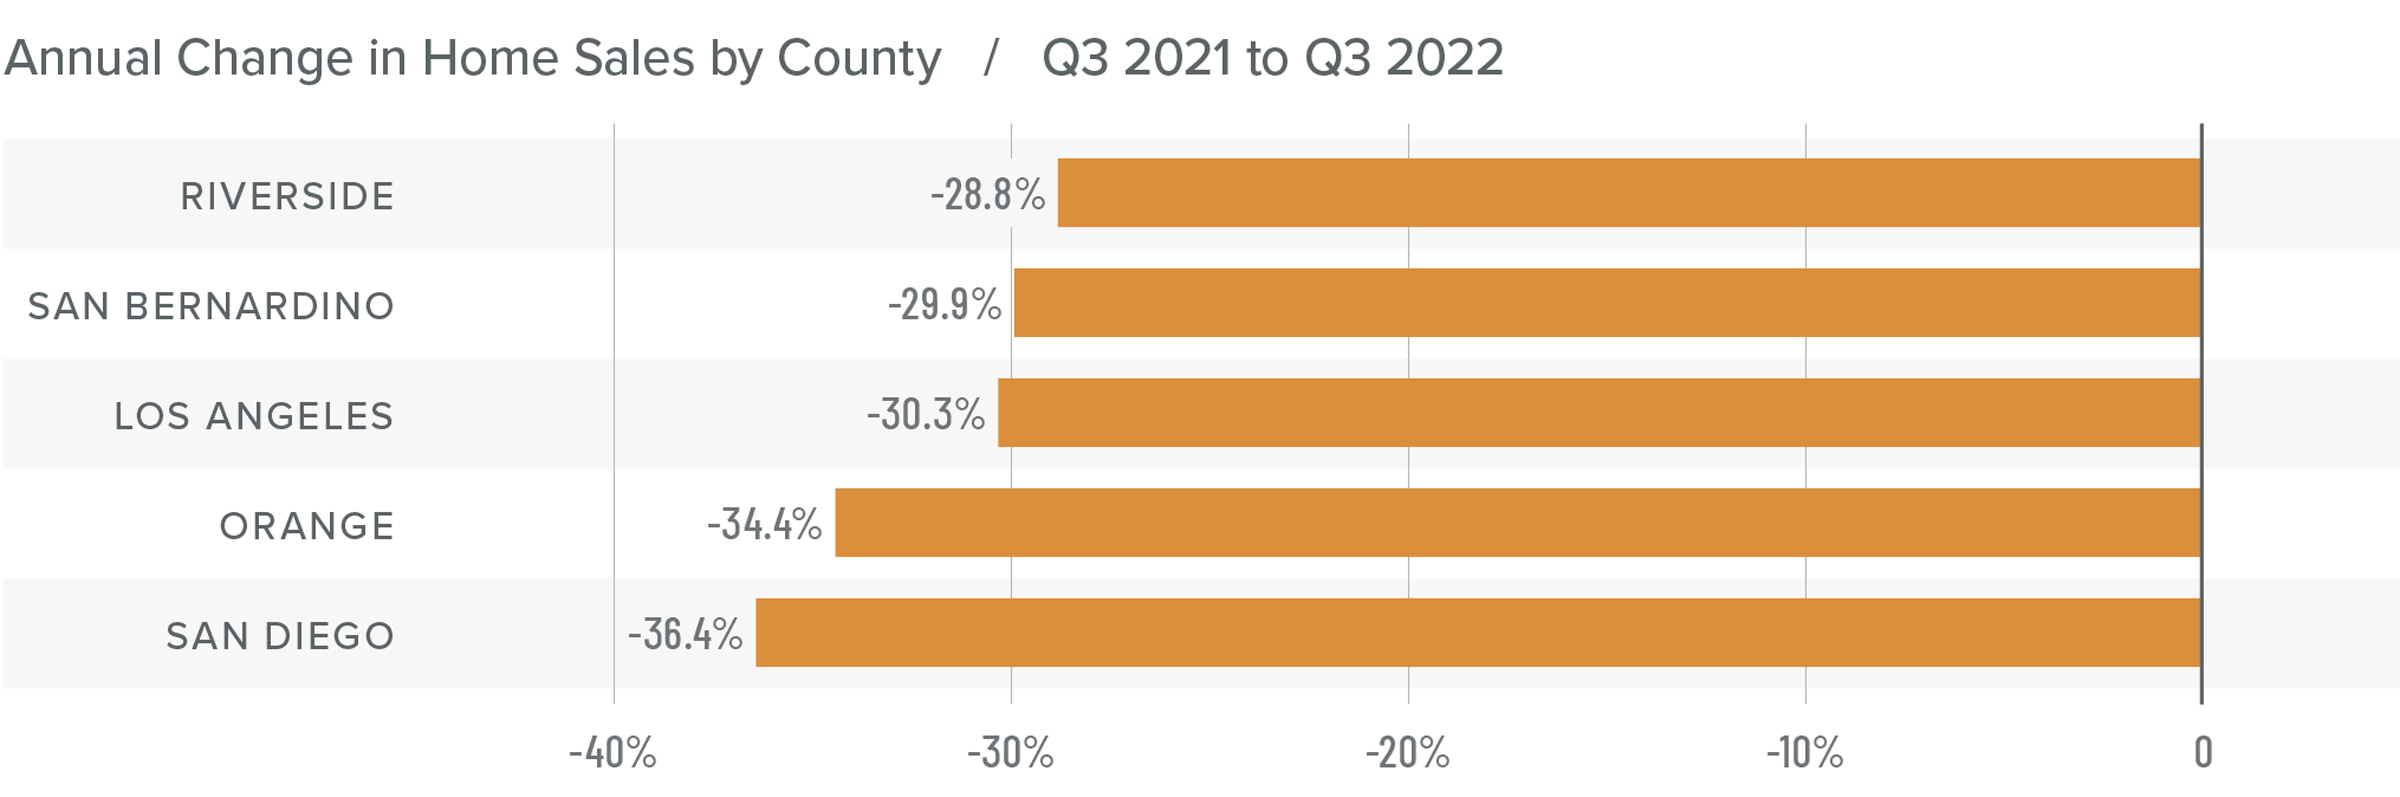 A bar graph showing the annual change in home sales for various counties in Southern California from Q3 2021 to Q3 2022. All counties have a negative percentage year-over-year change. Riverside tops the list at -28.8%, followed by San Bernardino at -29.9%, Los Angeles -30.3%, Orange -34.4%, and San Diego at -36.4%.